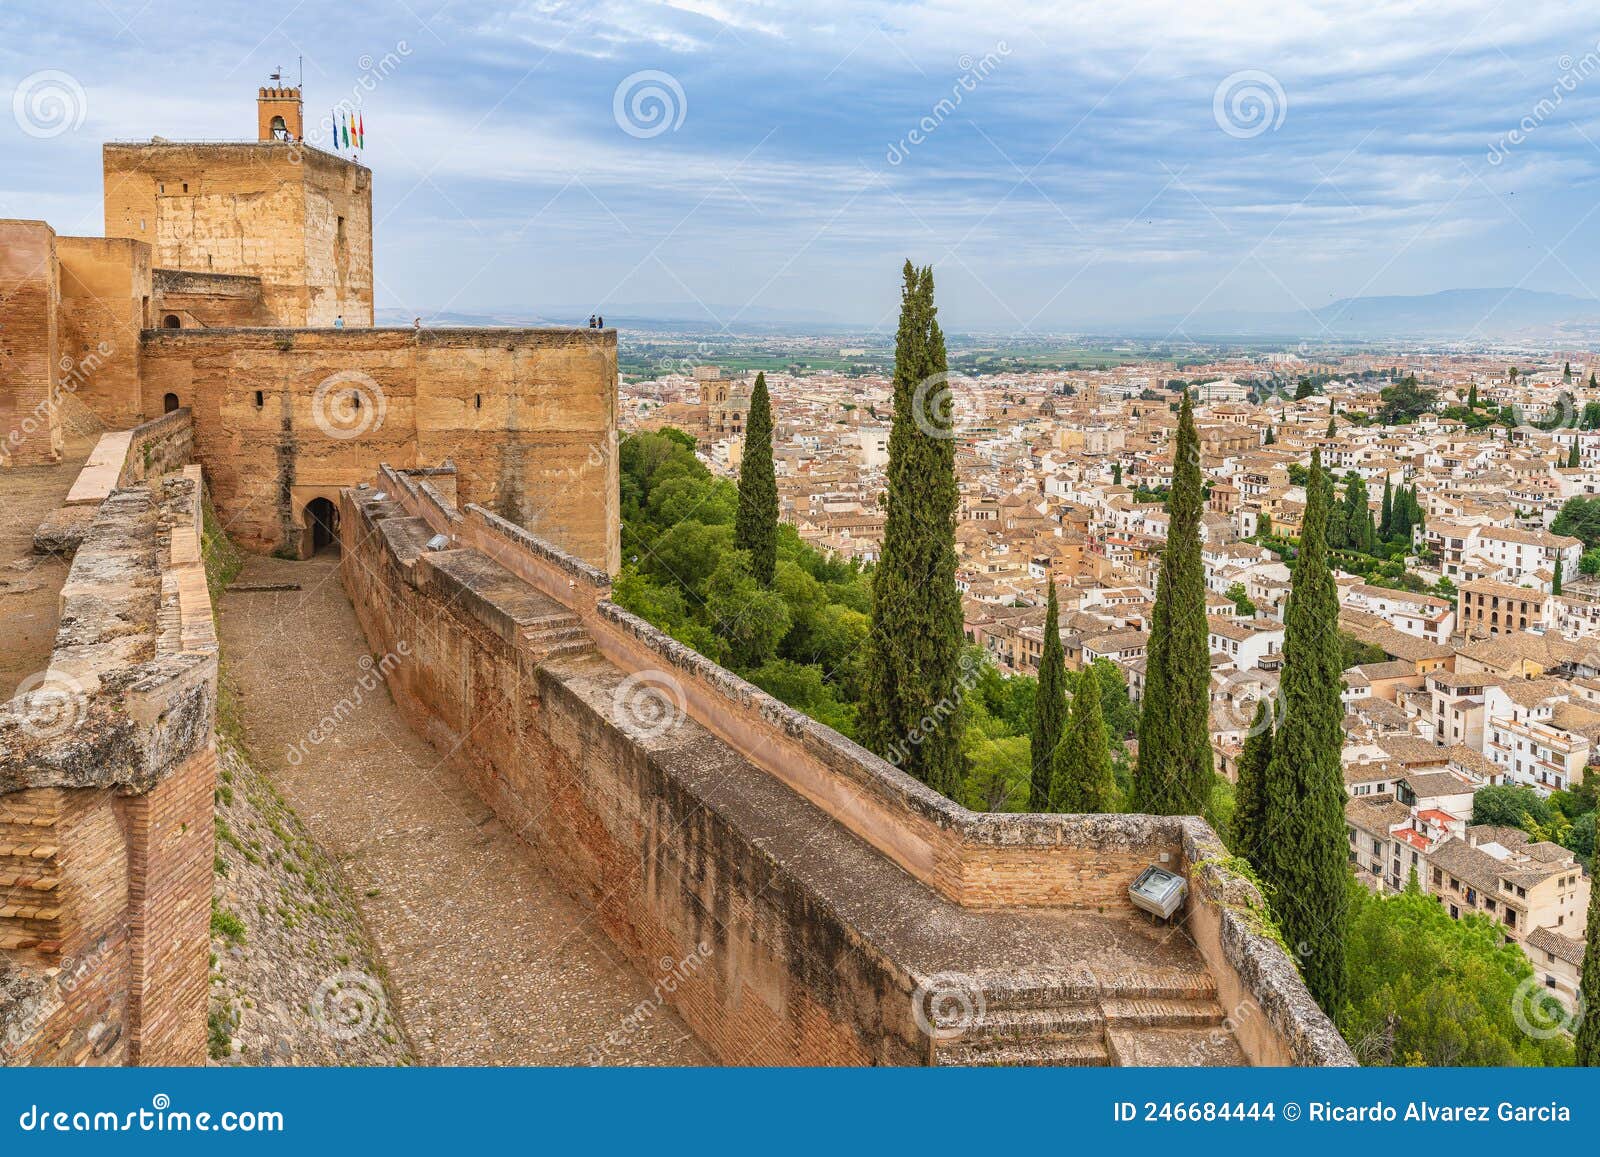 view of the alhambra in the andalusian city of granada, in spain.